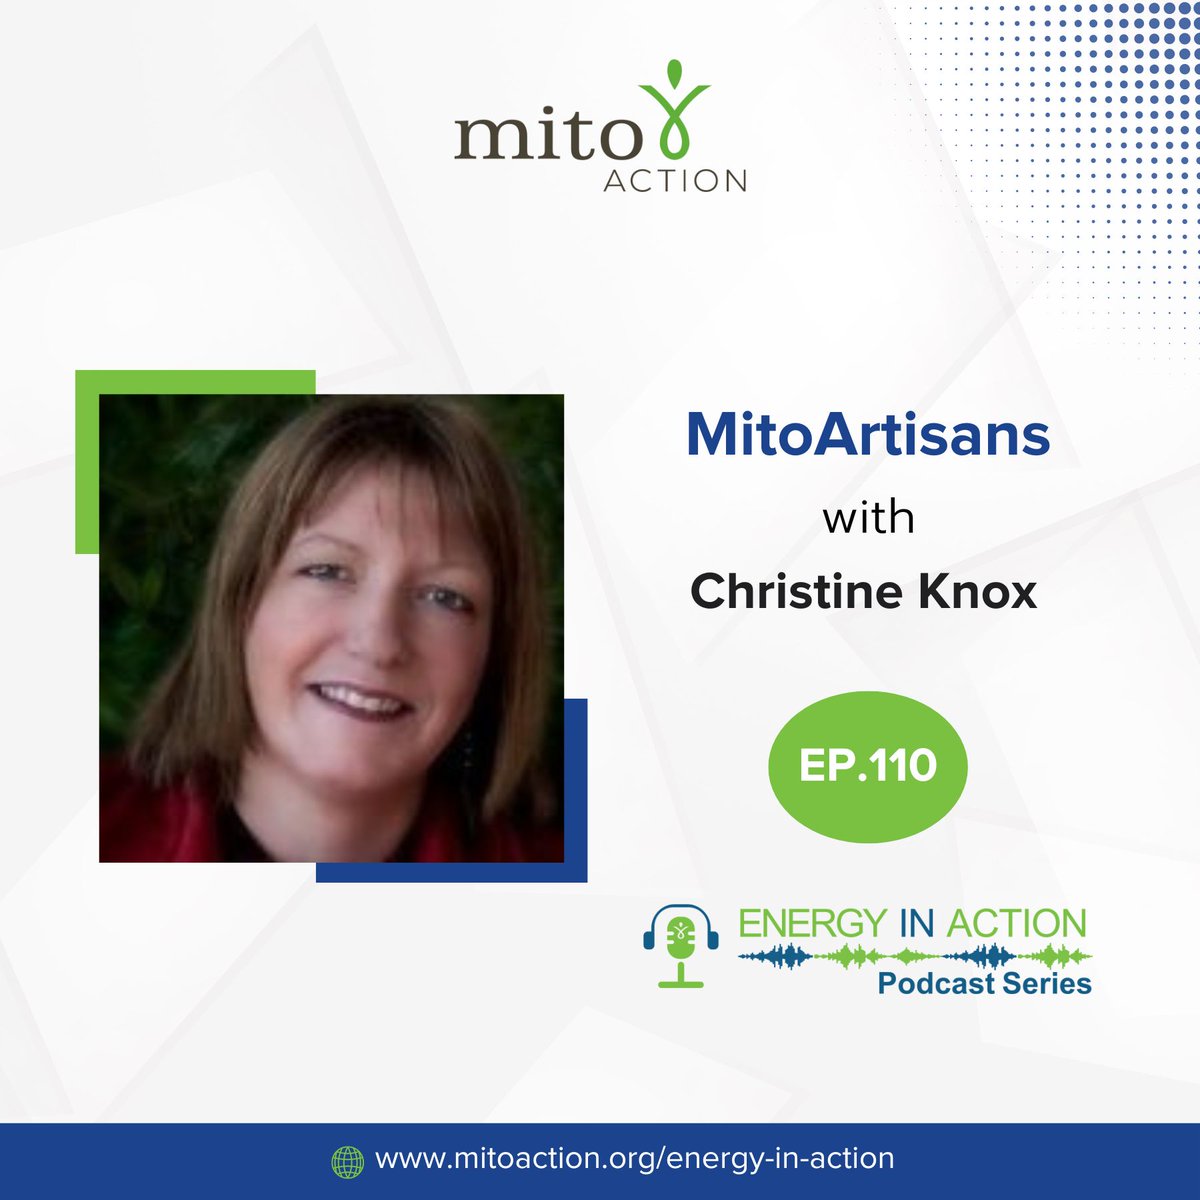 Tune in to our latest episode of the Energy In Action Podcast with guest Christine Knox to learn about her MitoArtisan’s Playtime program. Listen on our website today! buff.ly/3V21cWw